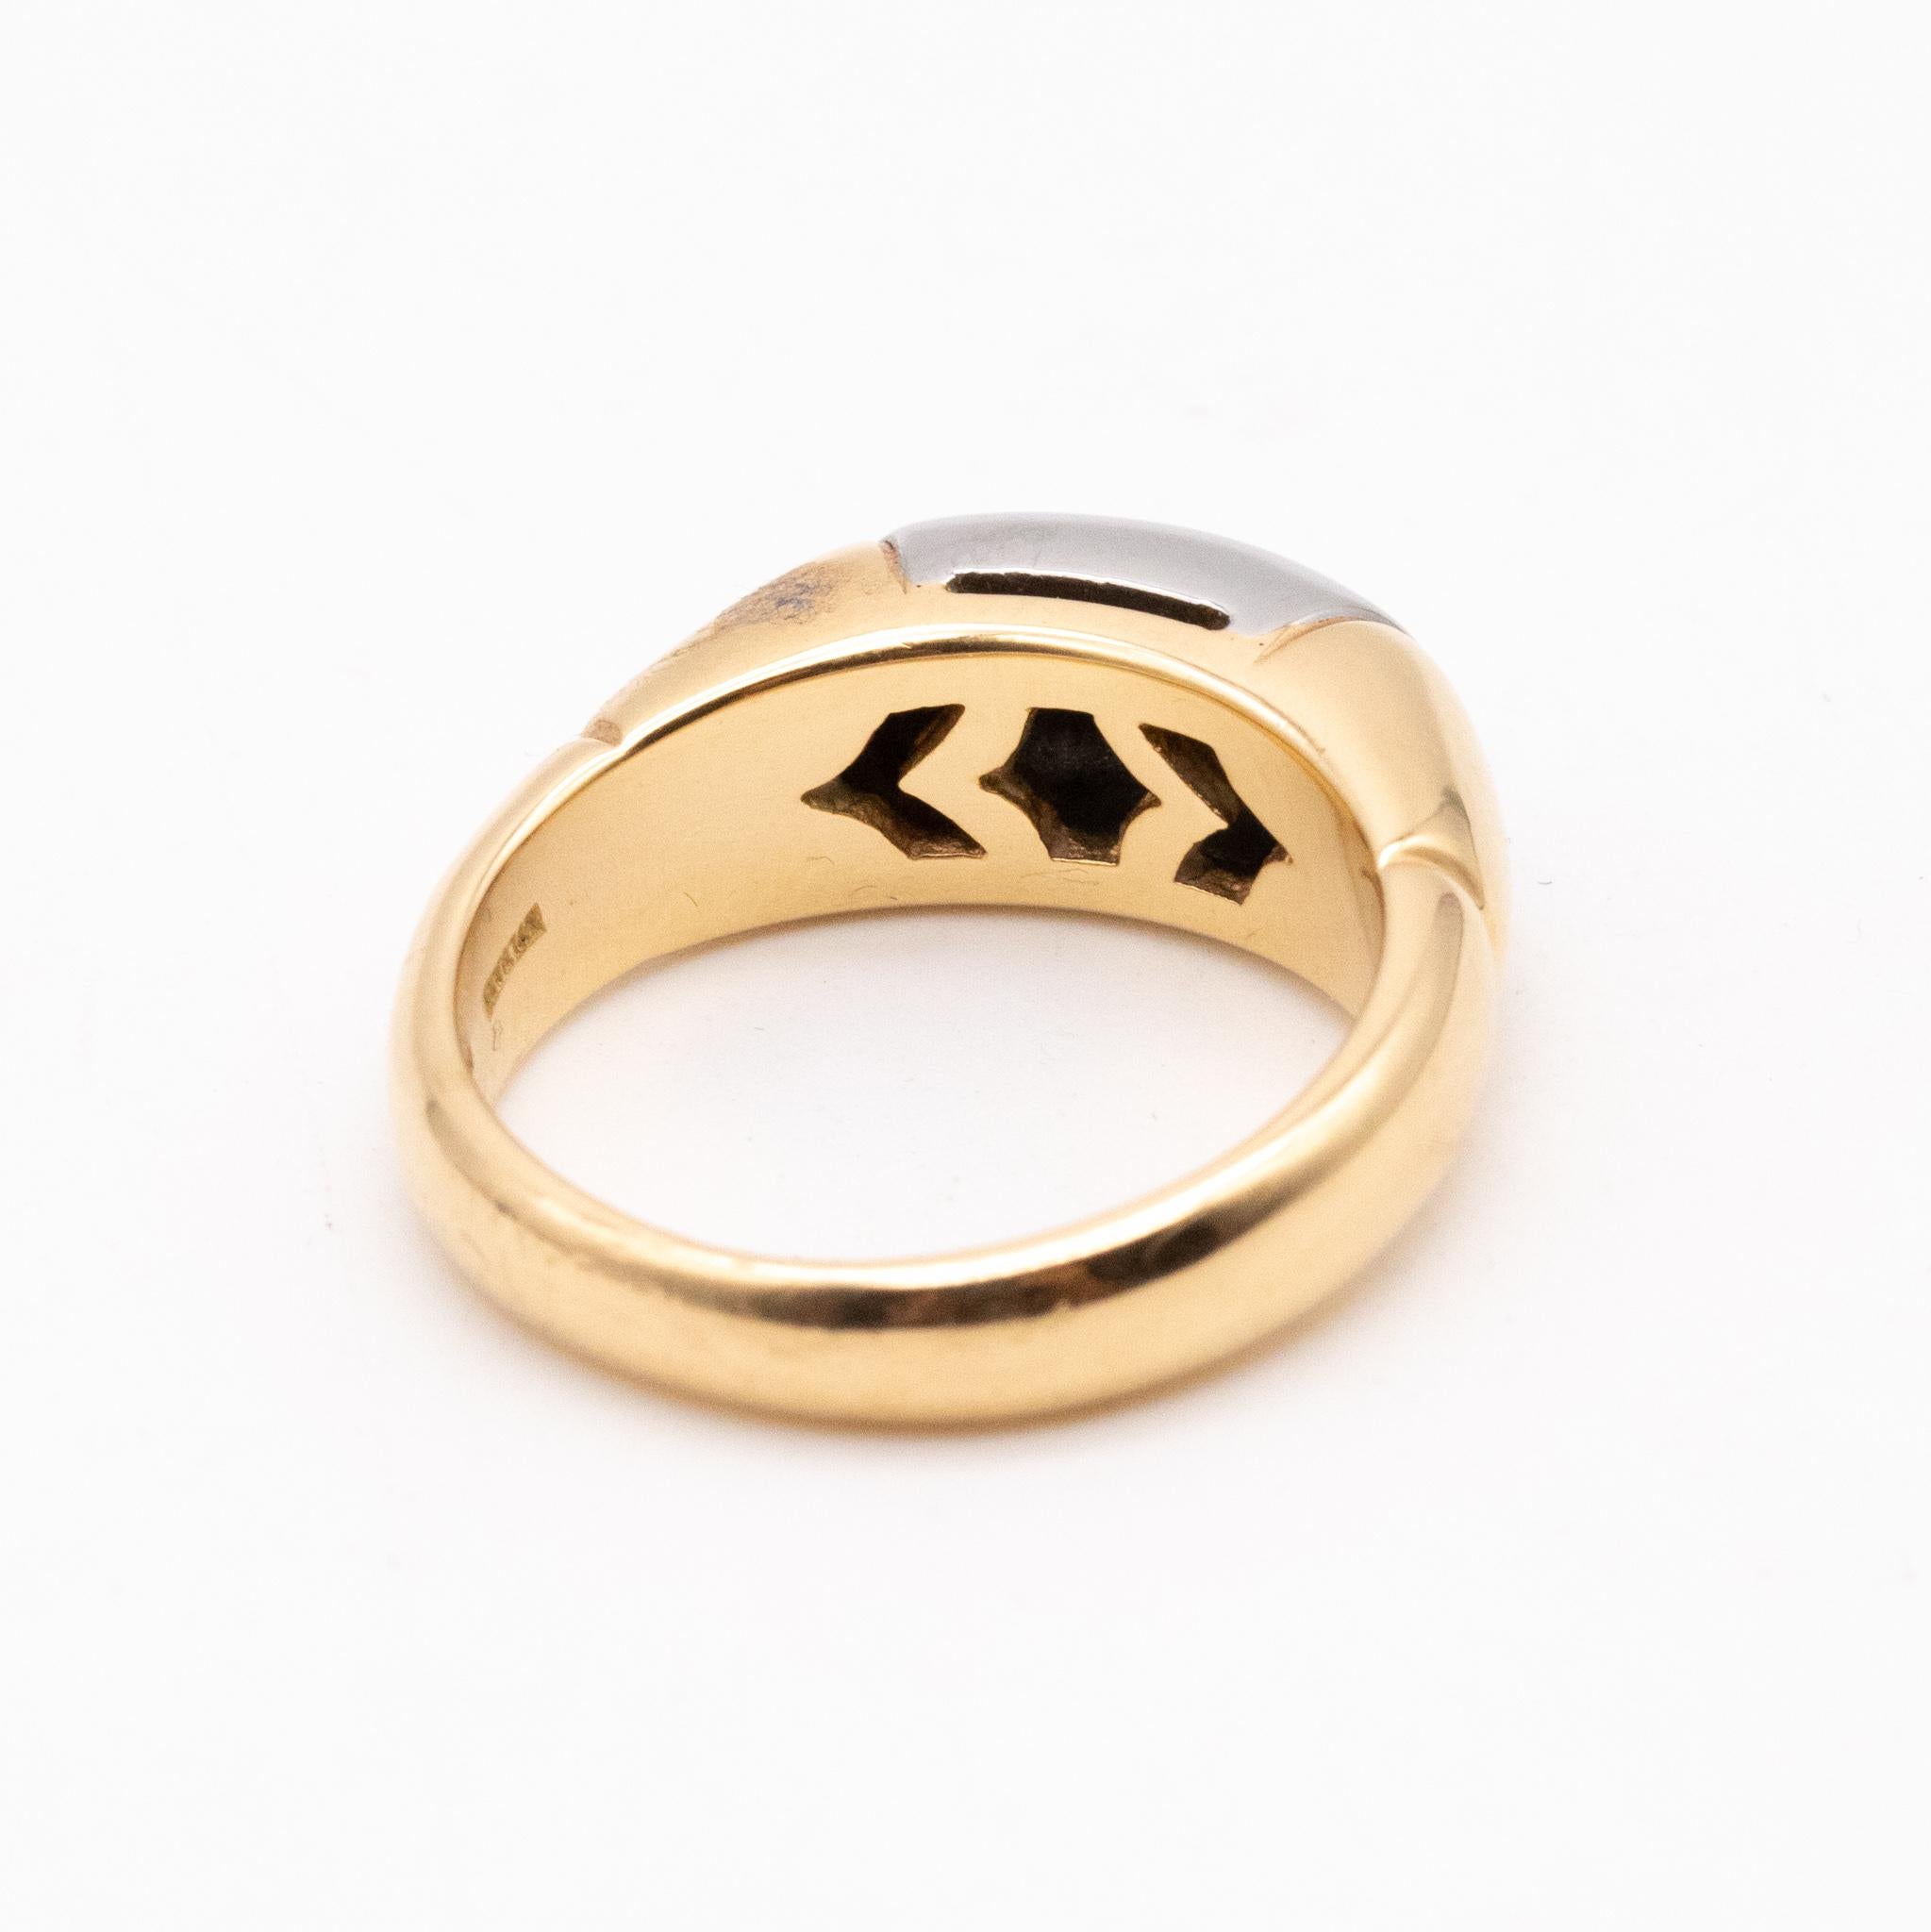 Bvlgari Roma Tronchetto Ring in Two Tones of 18kt Gold 2